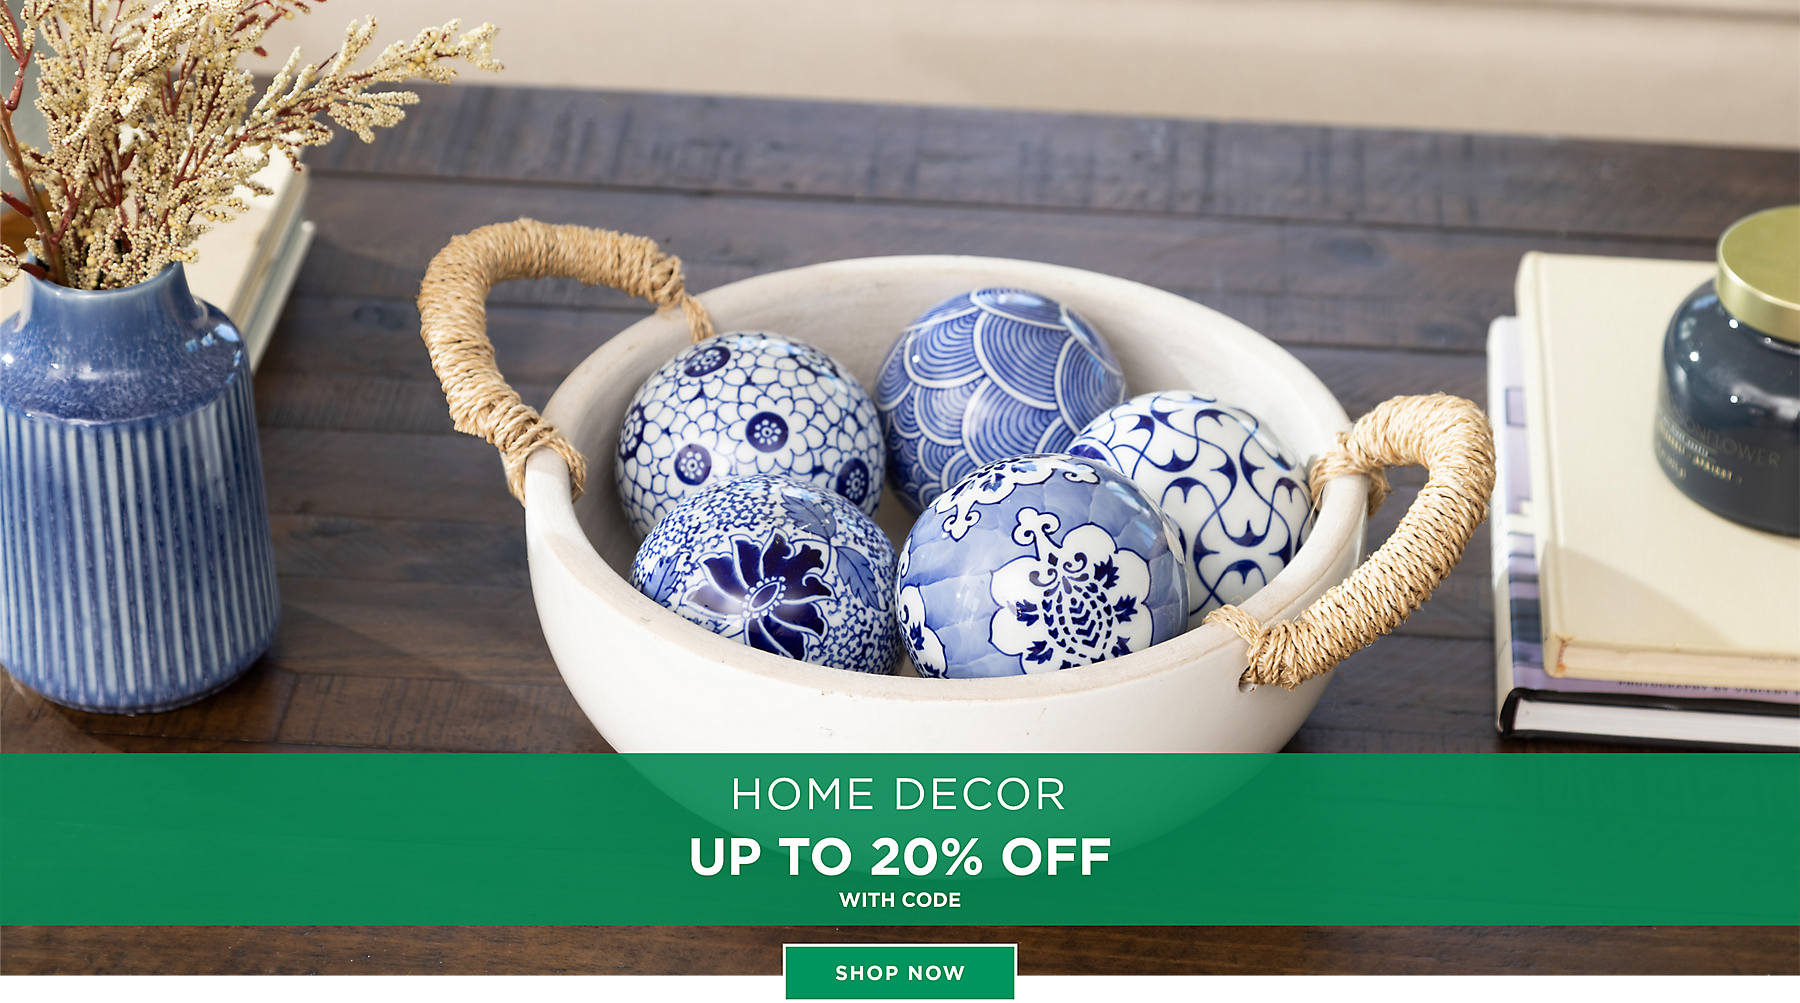 Home Decor Up to 20% Off with code Shop Now